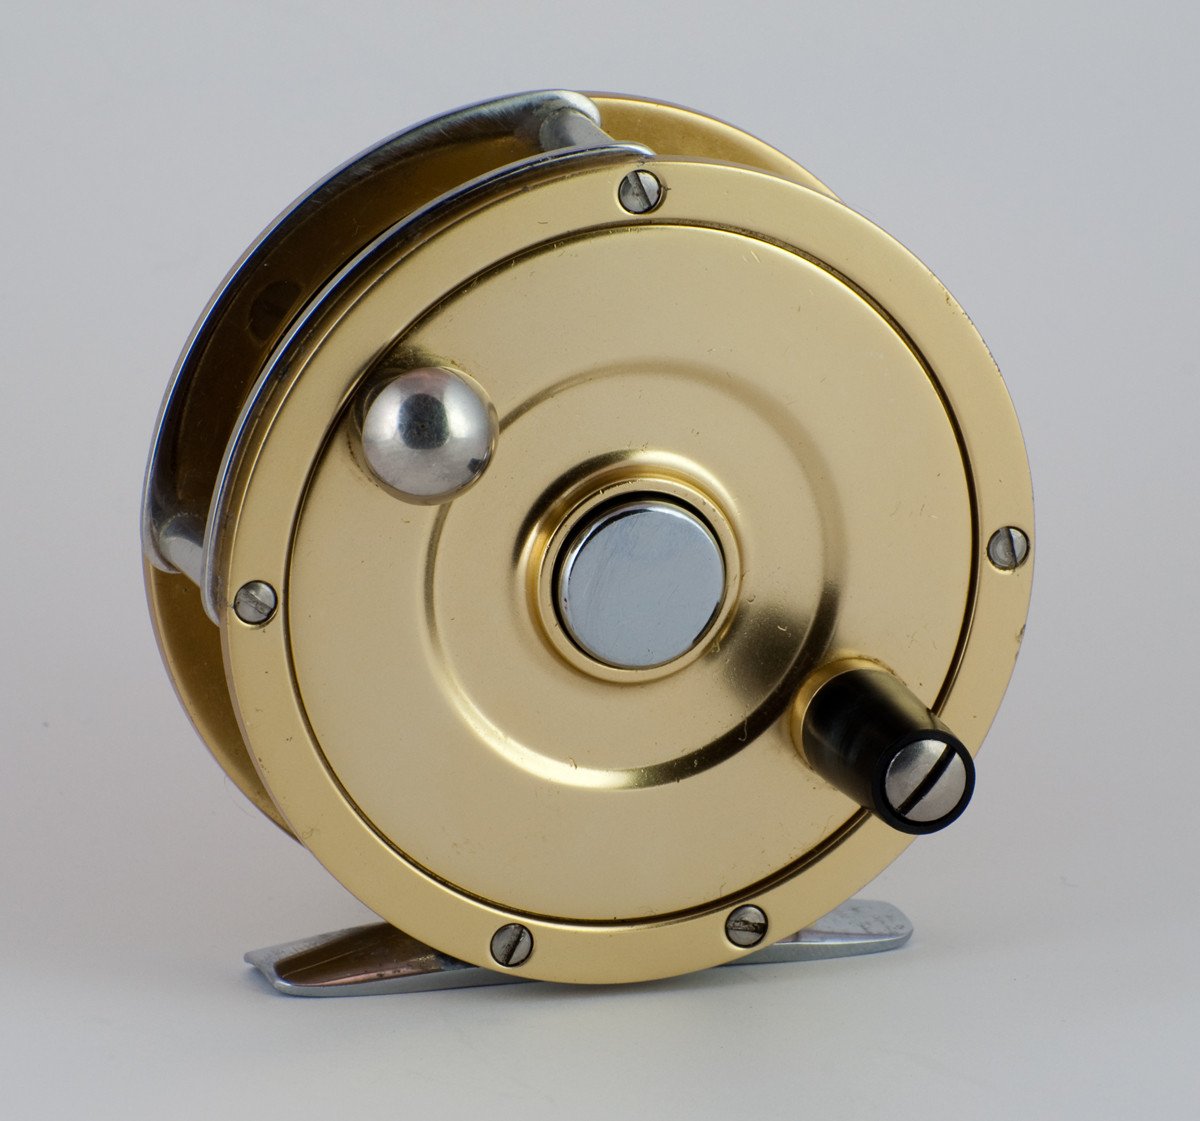 Fin-Nor No,3 Saltwater Fly Reel 通称ウェディングケーキ フィンノール フィンノア フライリール